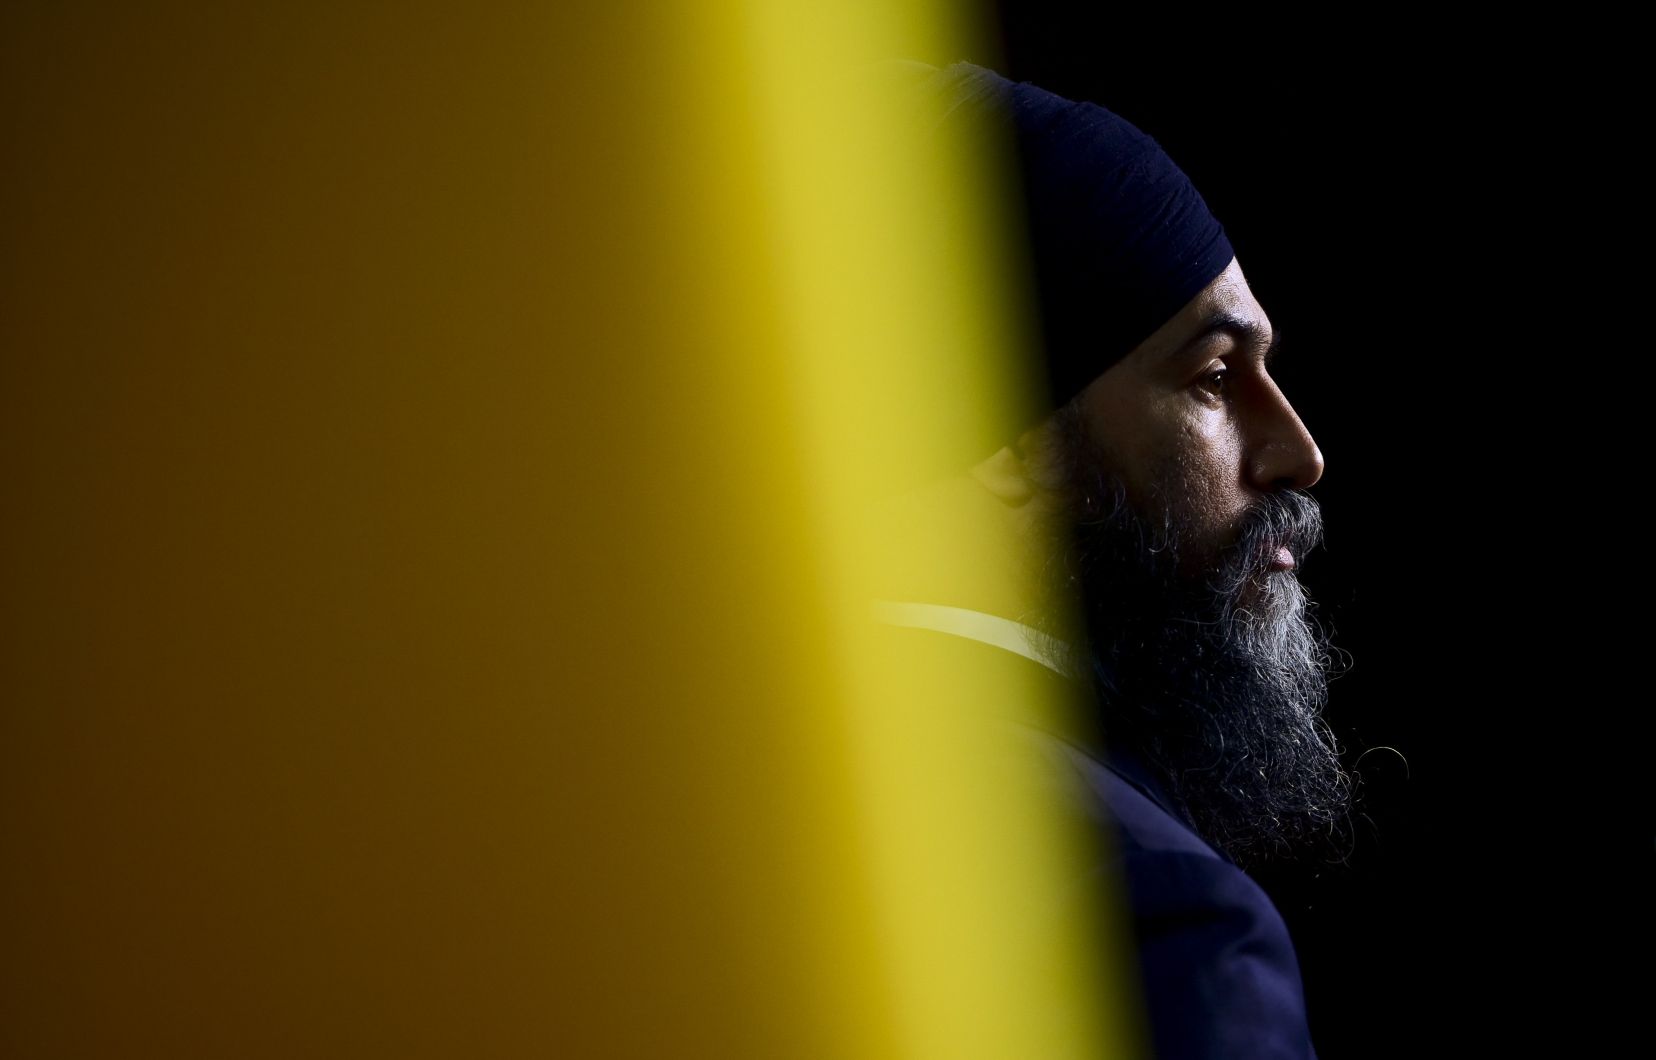 Jagmeet Singh supports the continuous operation of the Fifth Line oil pipeline

